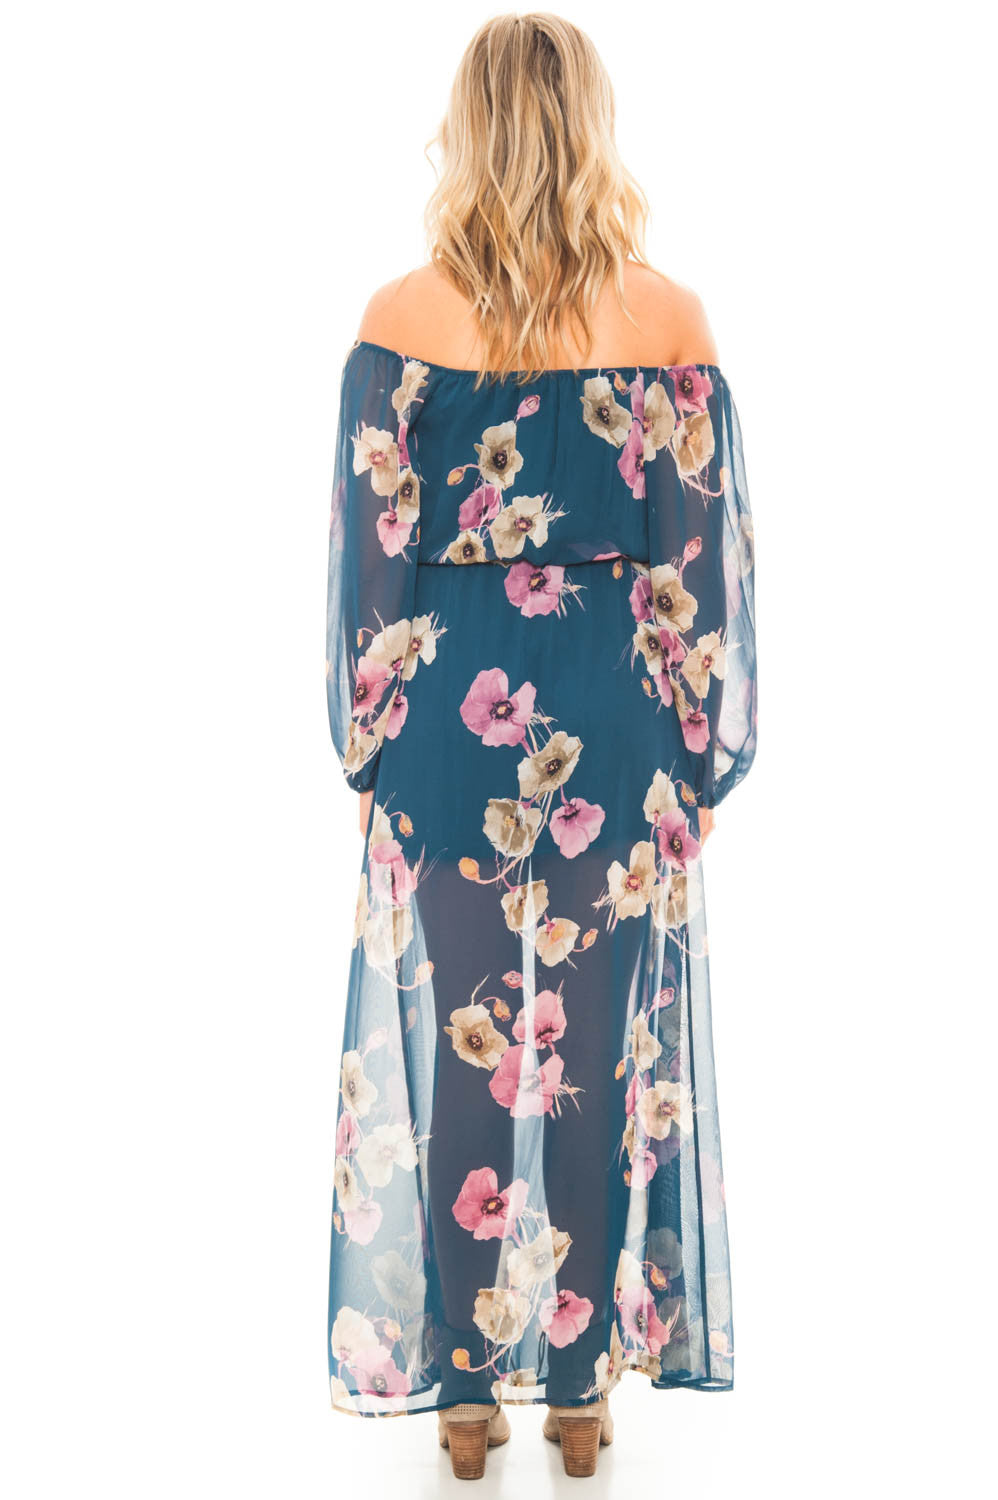 Dress - Off Shoulder Long Sleeve Maxi Dress with a Keyhole Front